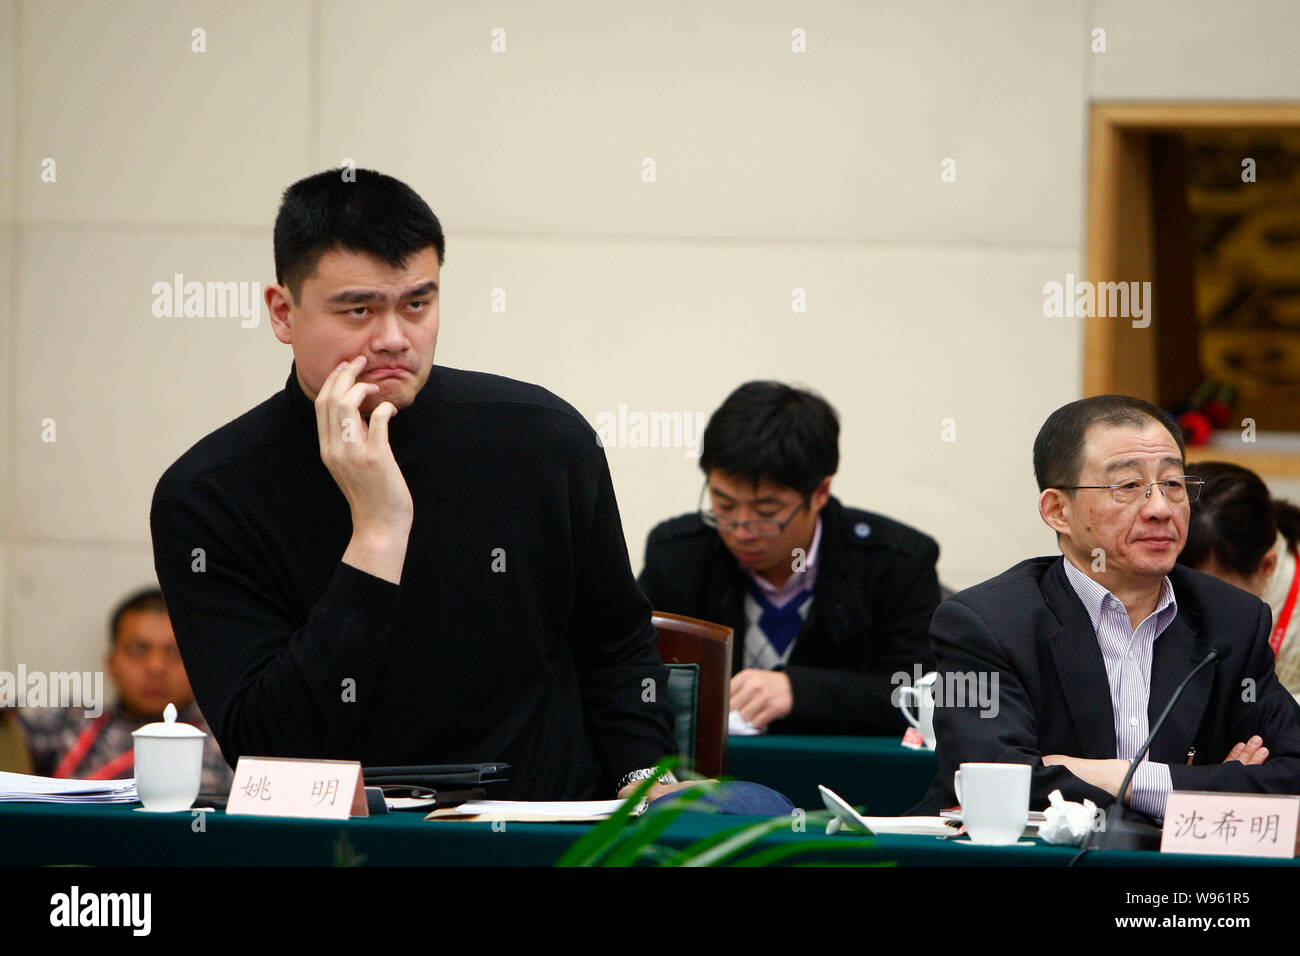 Retired Chinese basketball superstar Yao Ming is pictured during a training class for new members of the CPPCC (Chinese Peoples Political Consultative Stock Photo